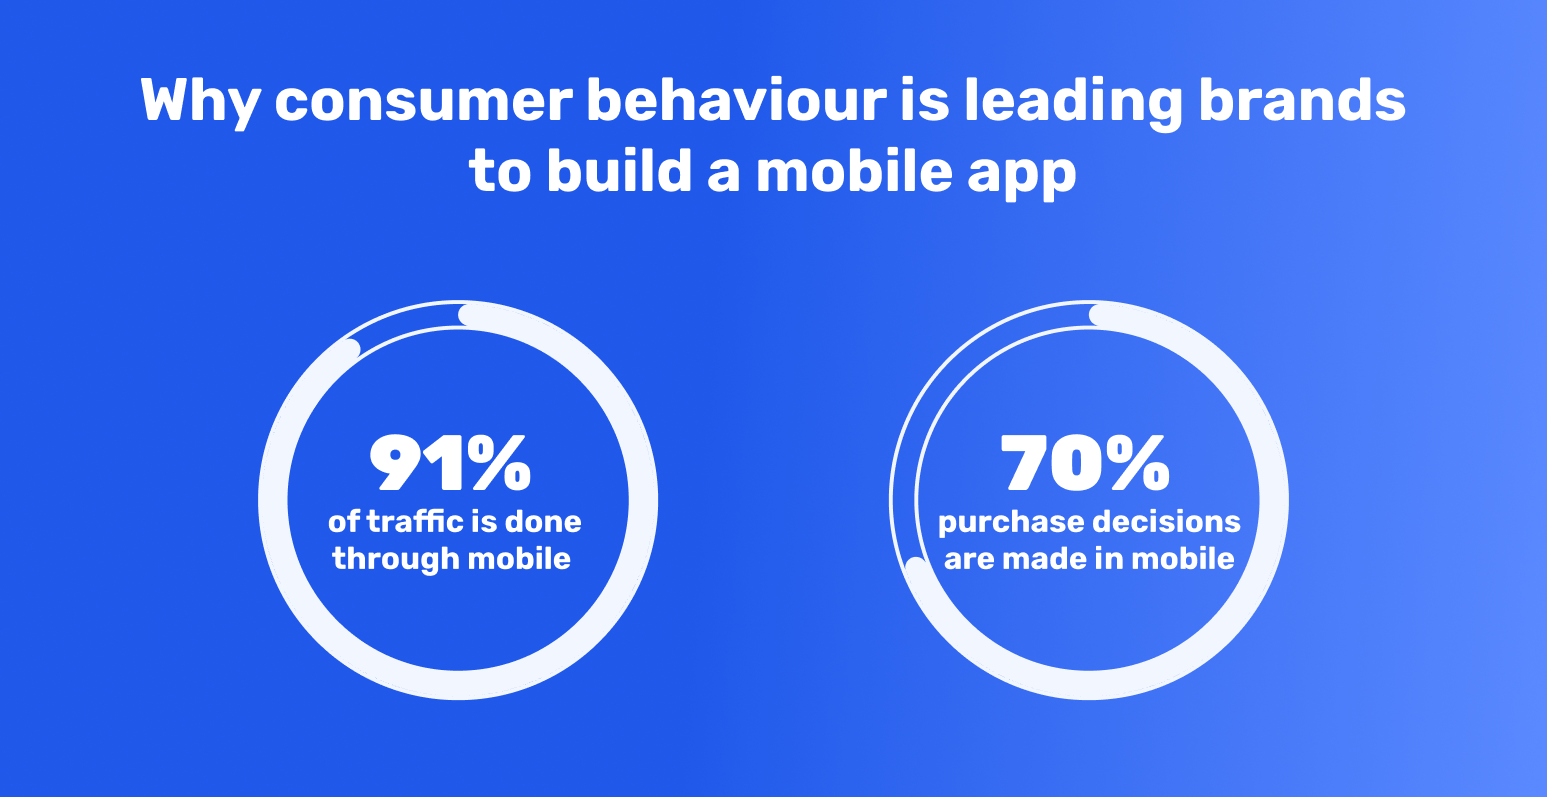 This image features the phrase 'Why Consumer Behavior is Leading Brands to Build a Mobile App' displayed at the top, along with two circular graphs. One graph shows that 91% of traffic is generated through mobile devices, while the other graph reveals that 70% of purchase decisions are made on mobile devices.